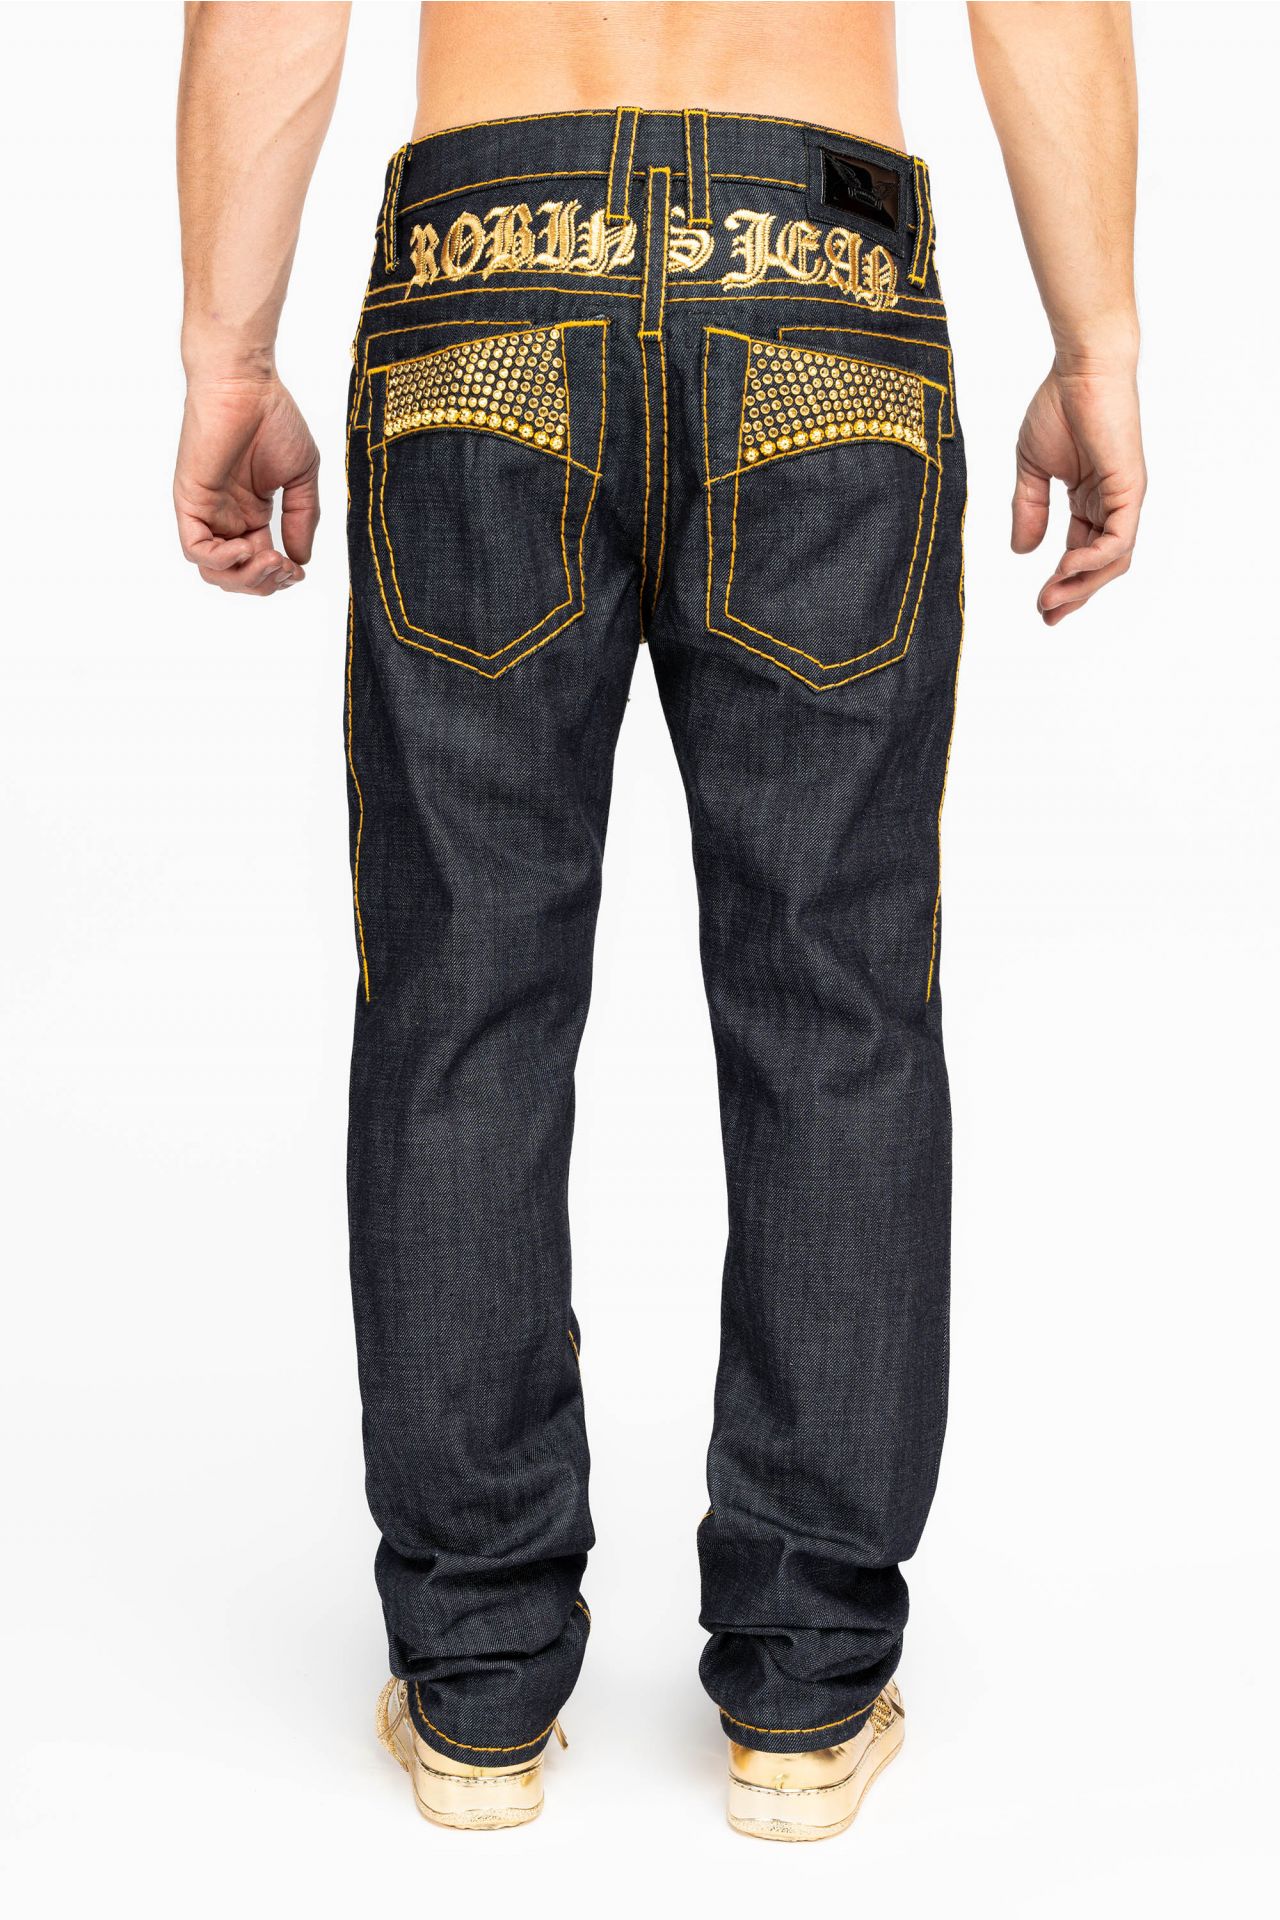 MENS RAW DENIM SLIM FIT CLASSIC JEANS WITH ORANGE HEAVY STITCHING STUDS AND CRYSTALS